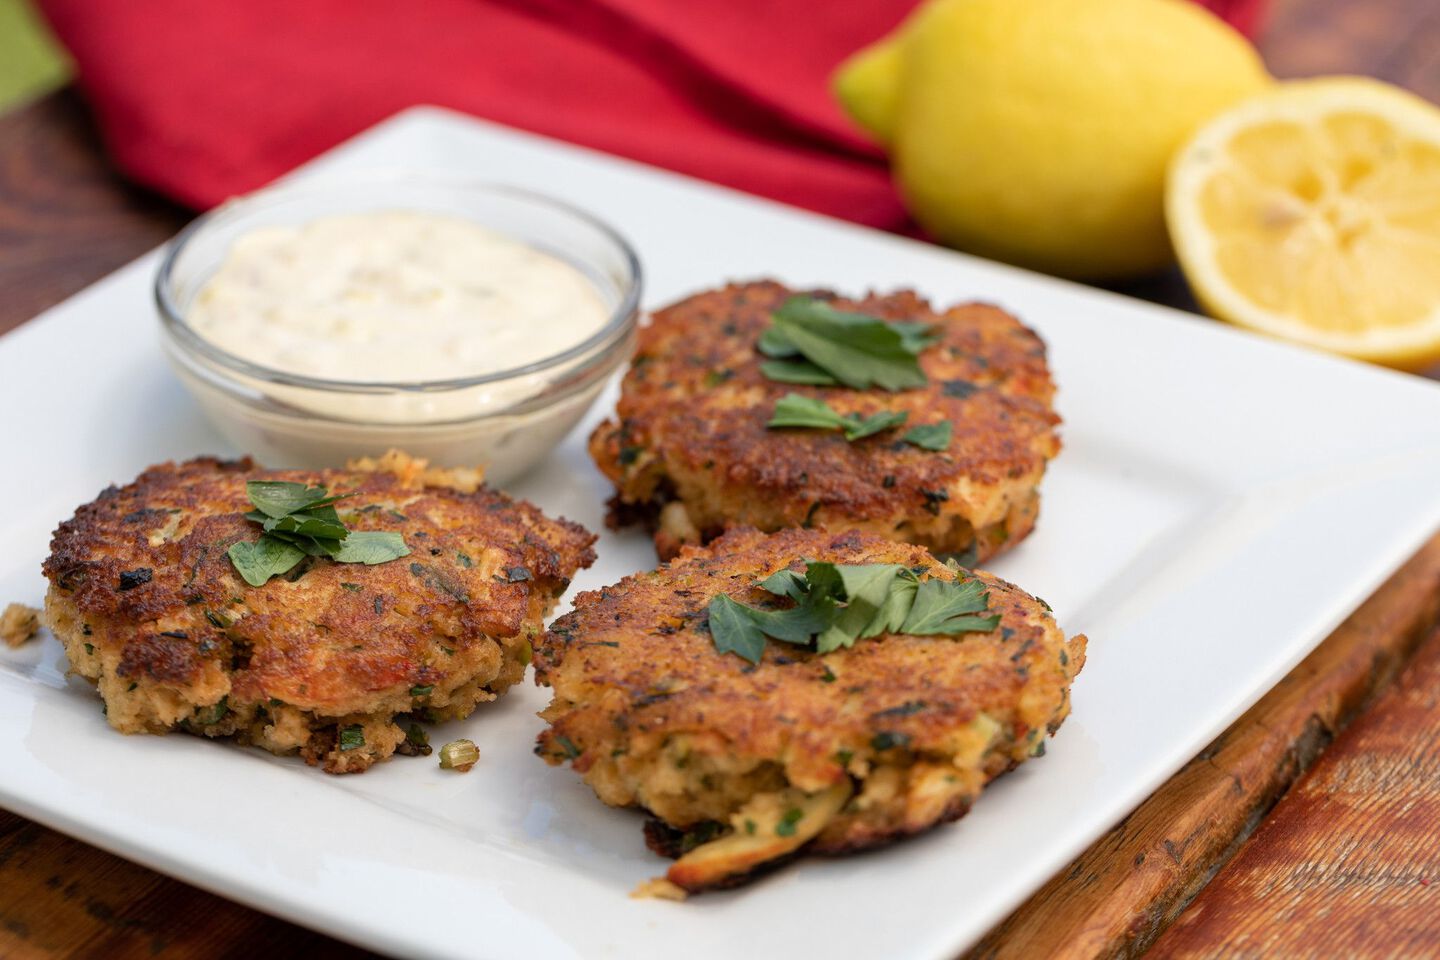 Crab Cakes with Homemade Tarter Sauce